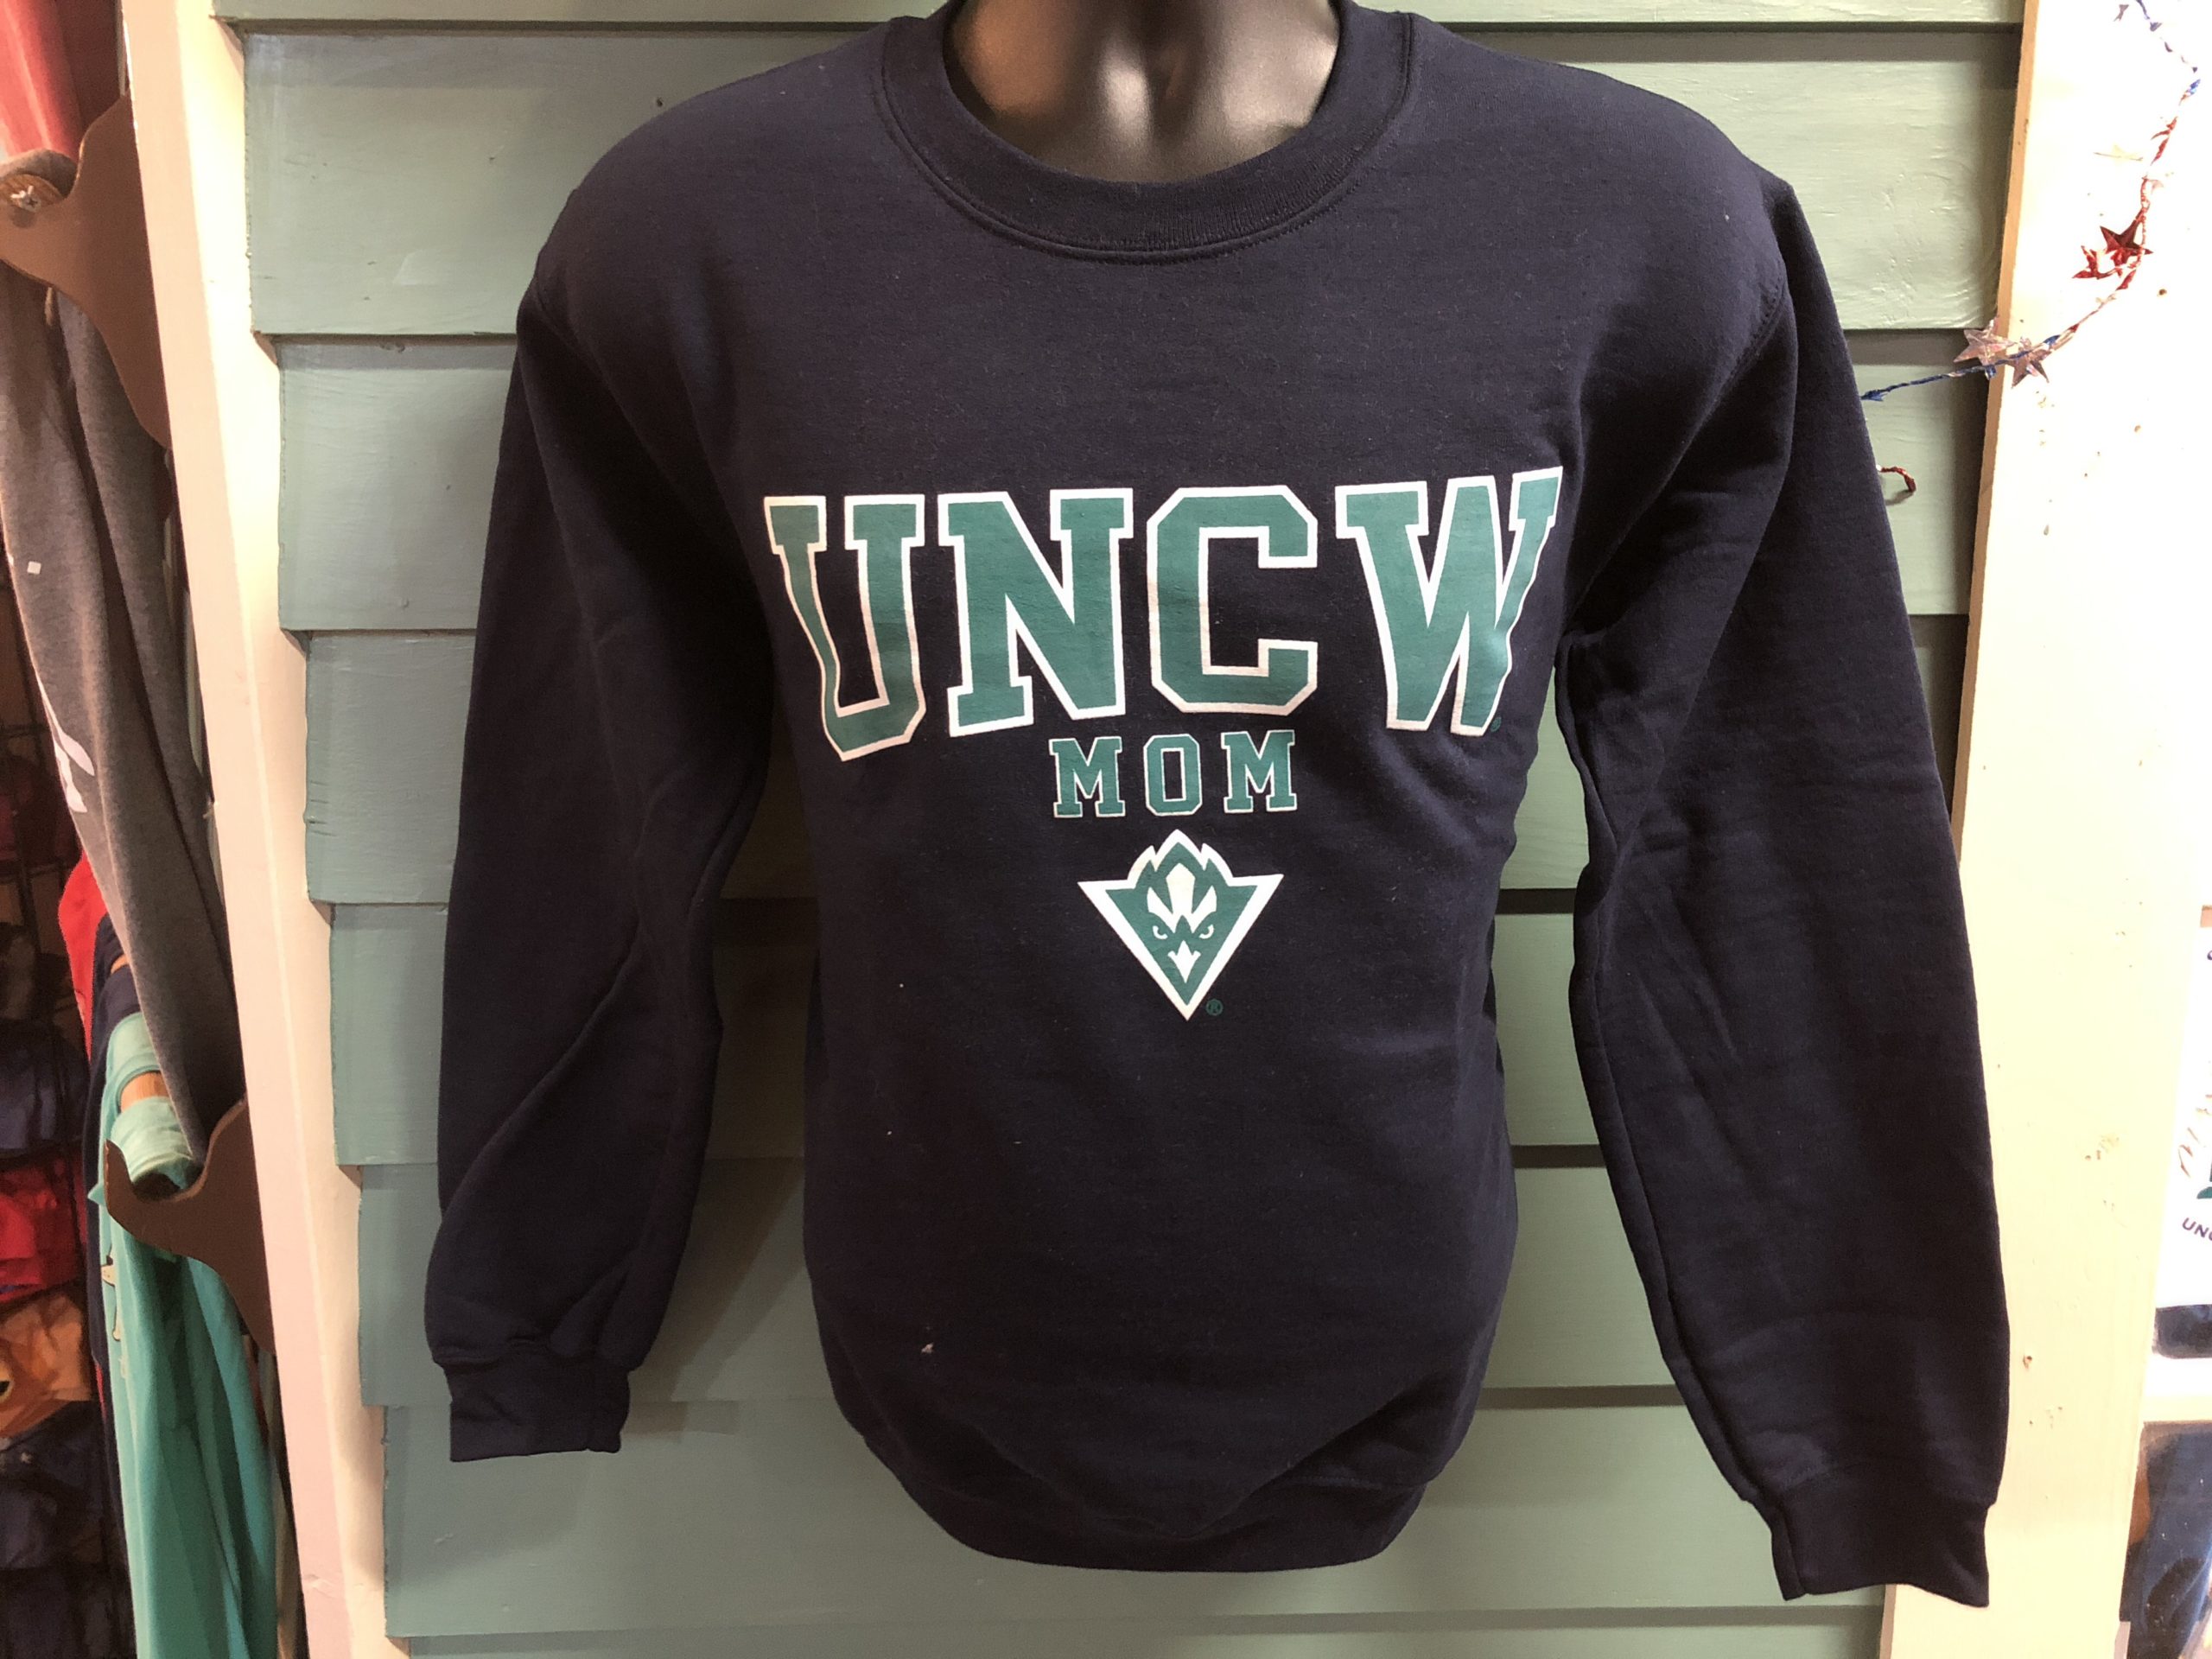 UNCW Mom- Crew Sweater - Top Toad - Top Toad